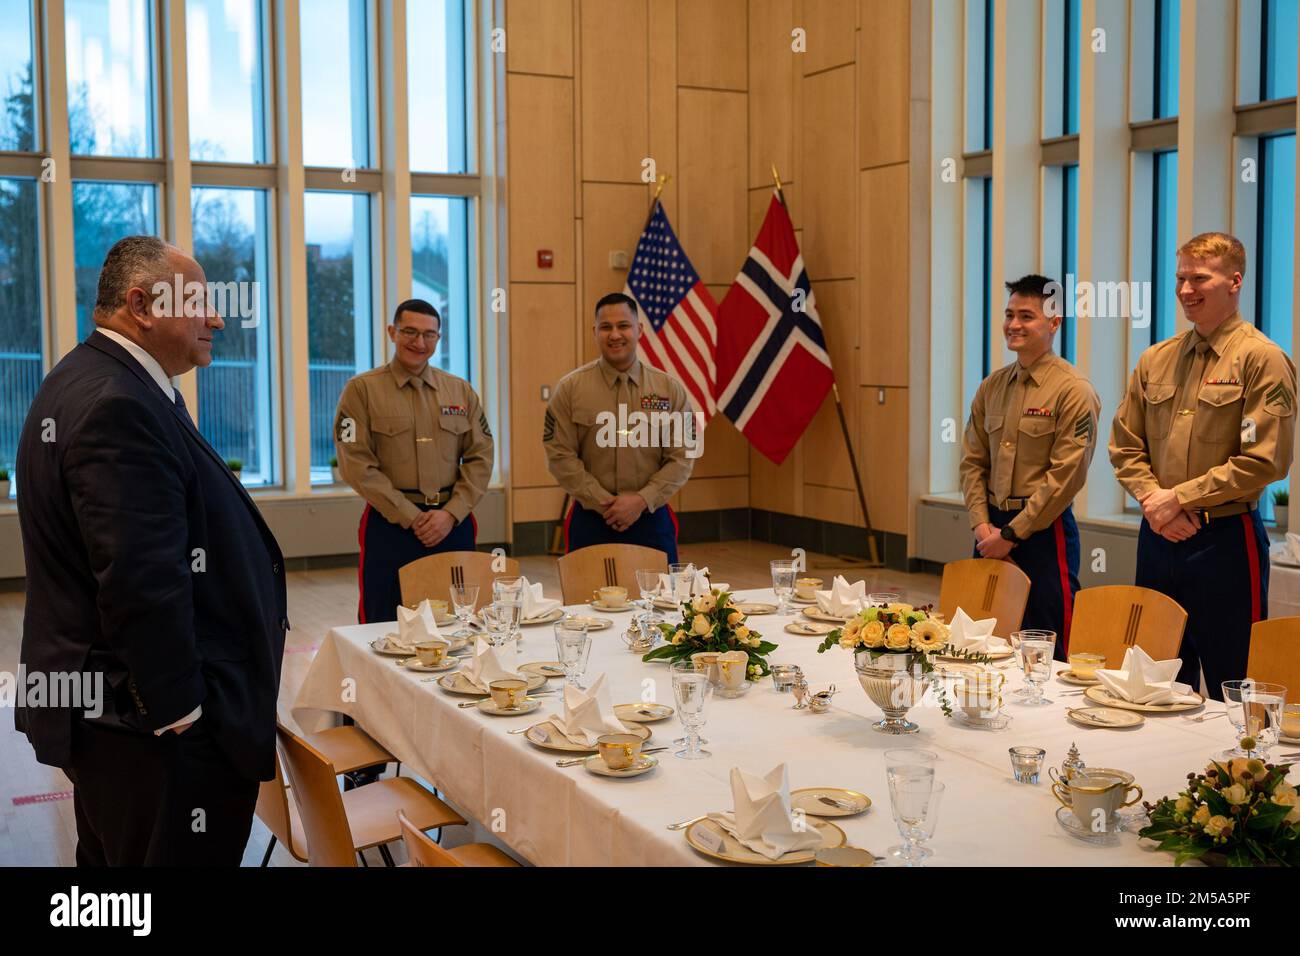 OSLO, Norway (Feb. 14, 2022) — Secretary of the Navy Carlos Del Toro speaks about his career in the U.S. Navy and his current role with U.S. Marines assigned to Marine Security Guard, Detachment Oslo in Oslo, Norway, Feb. 14, 2022. Secretary Del Toro is in Norway to visit U.S. service members and Norwegian government leaders to reinforce existing bilateral and multilateral security relationships between the U.S. Navy and the Royal Norwegian Navy. Stock Photo